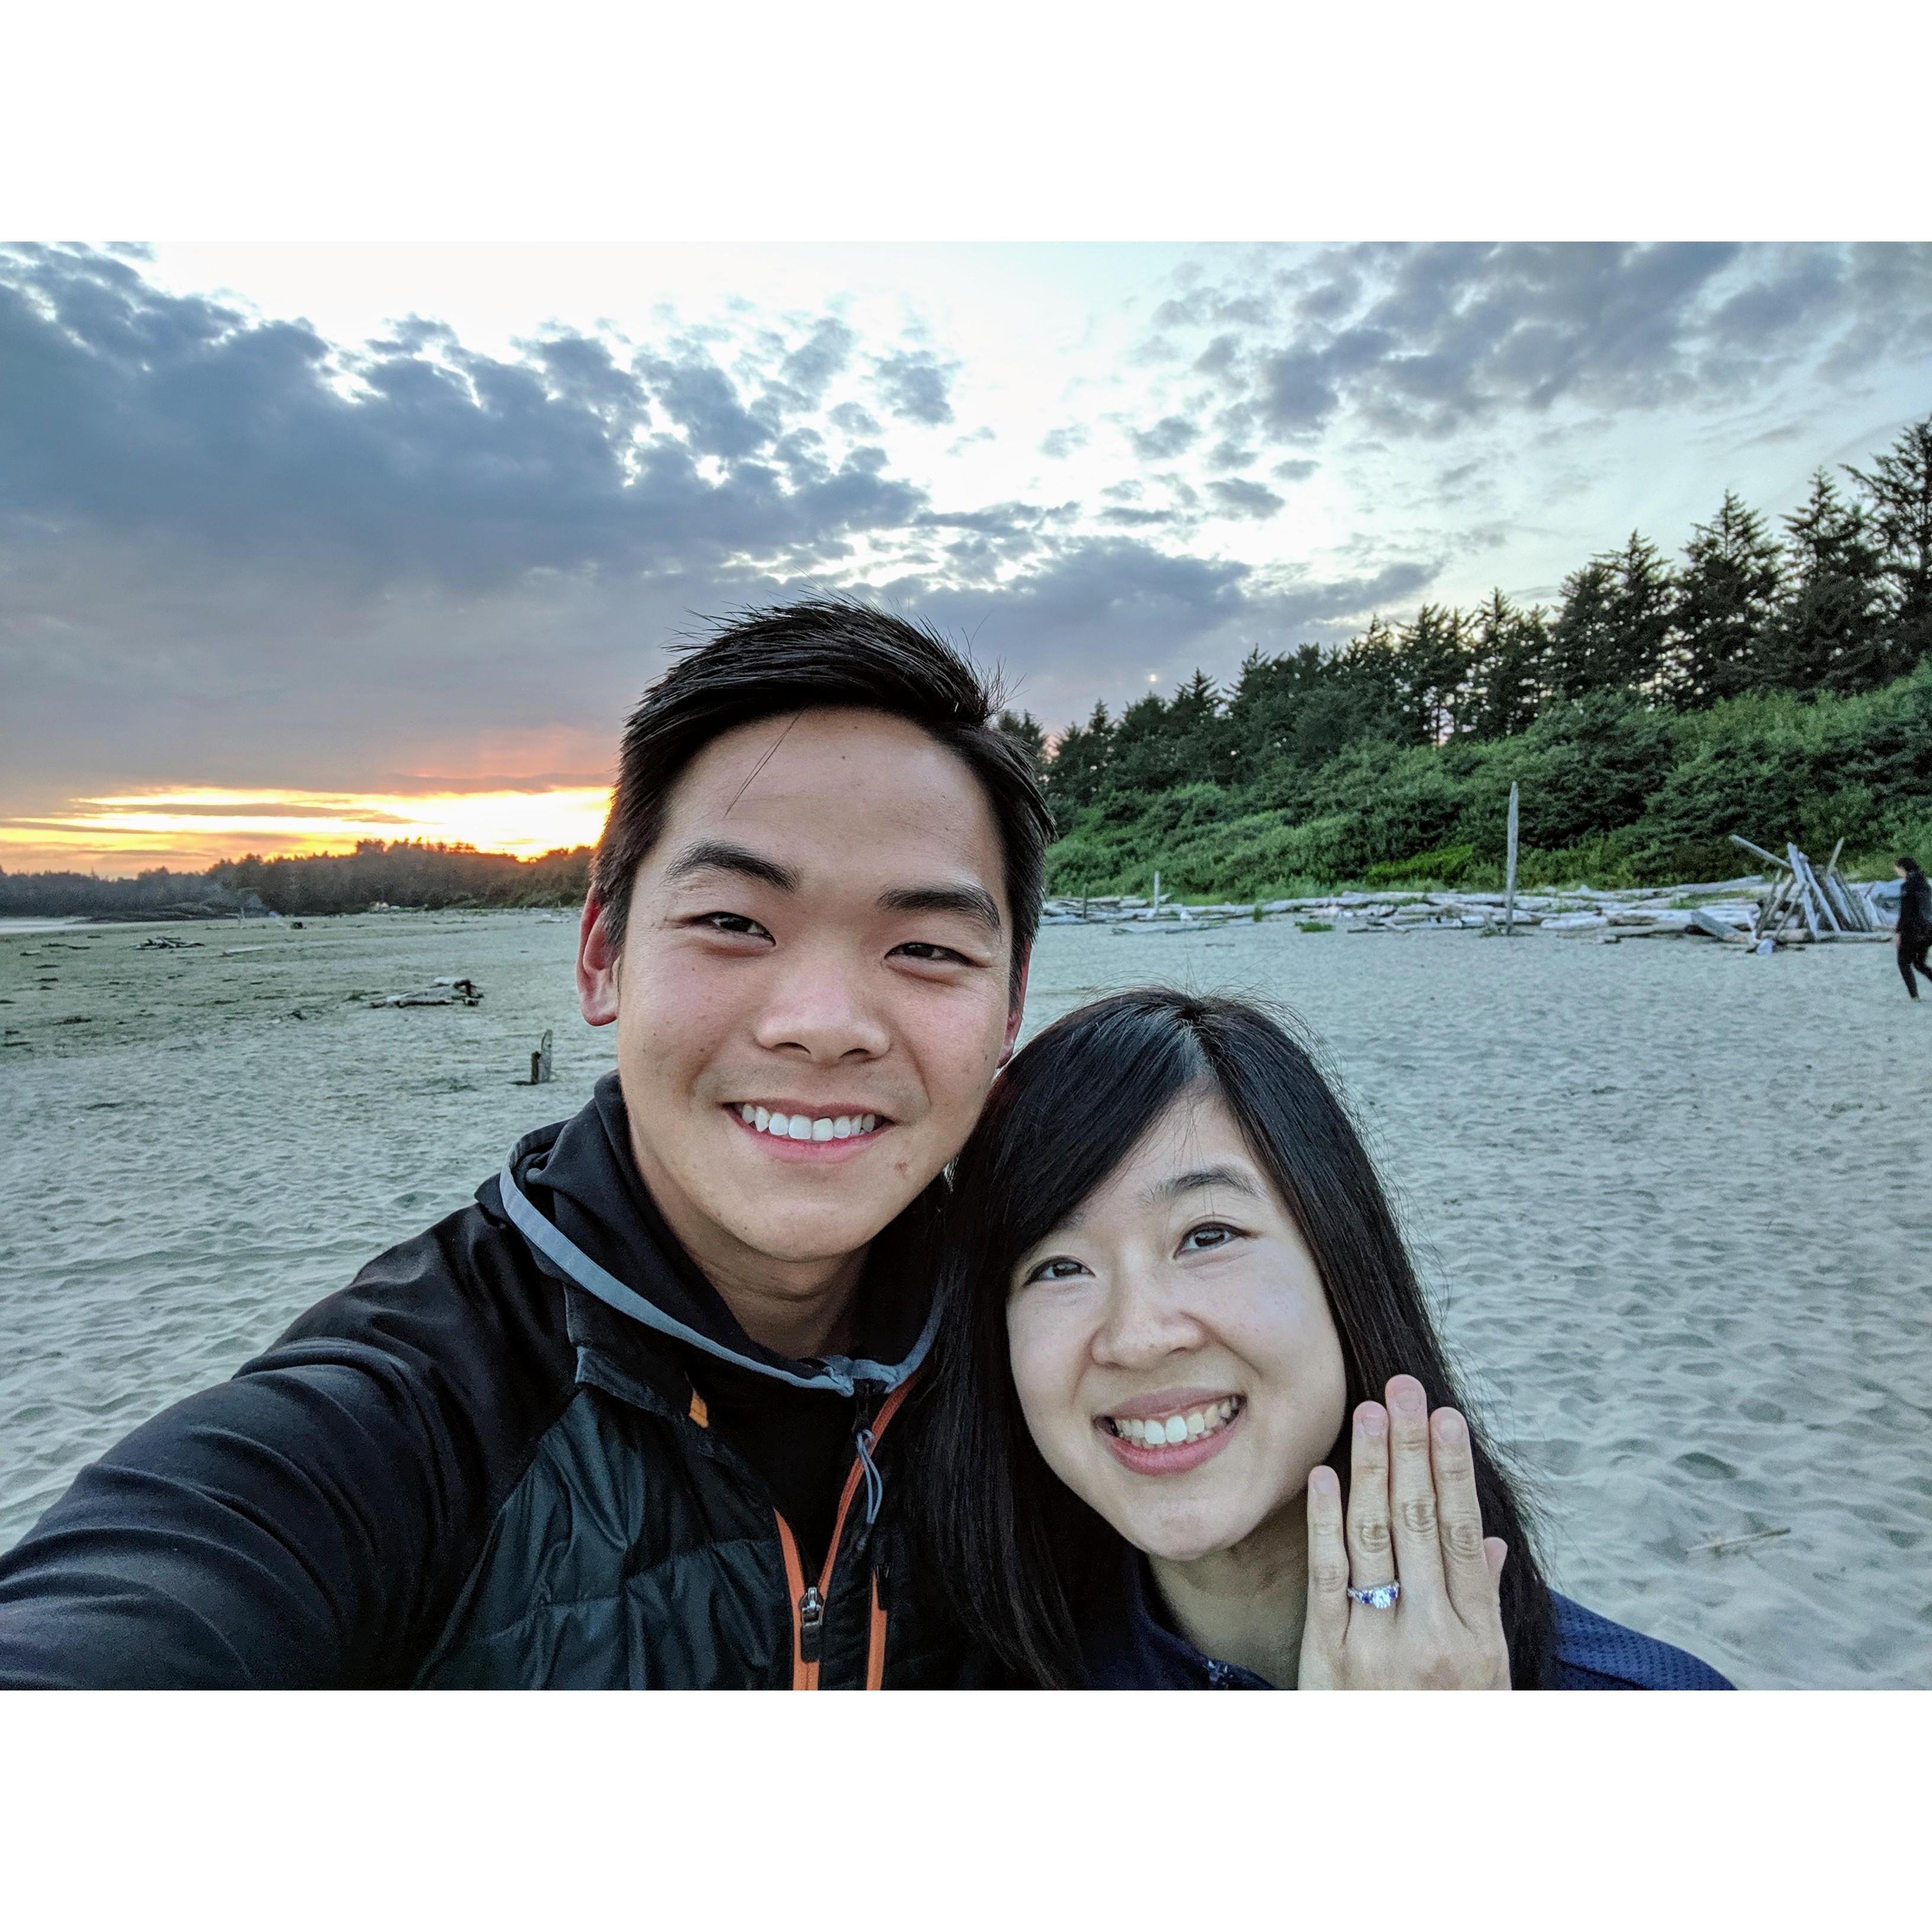 August 2019 - We get engaged on our Vancouver Island trip! The engagement story is quite funny but you'll want to hear it in person. :)